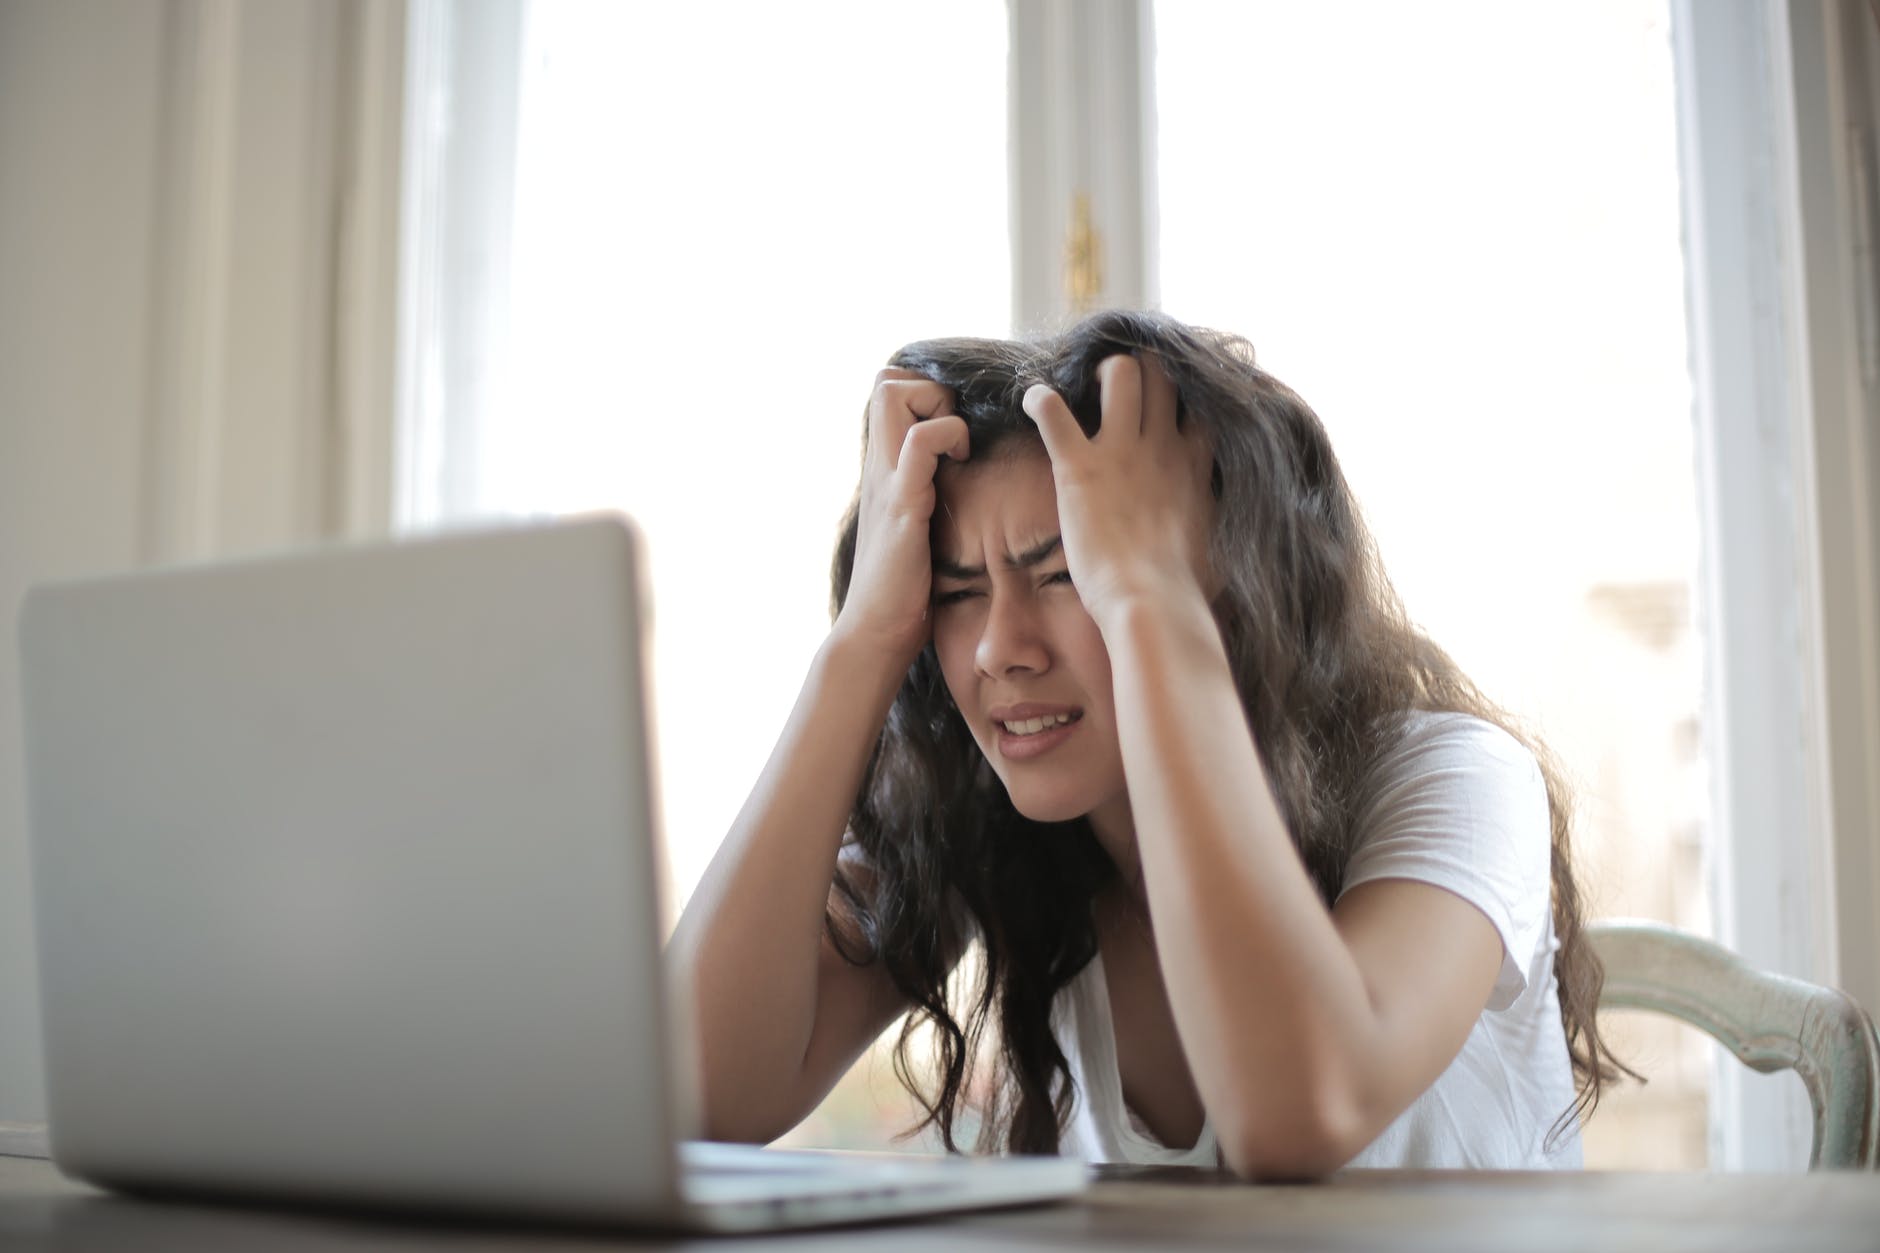 A stressed woman with her head in her hands sitting in front of a laptop